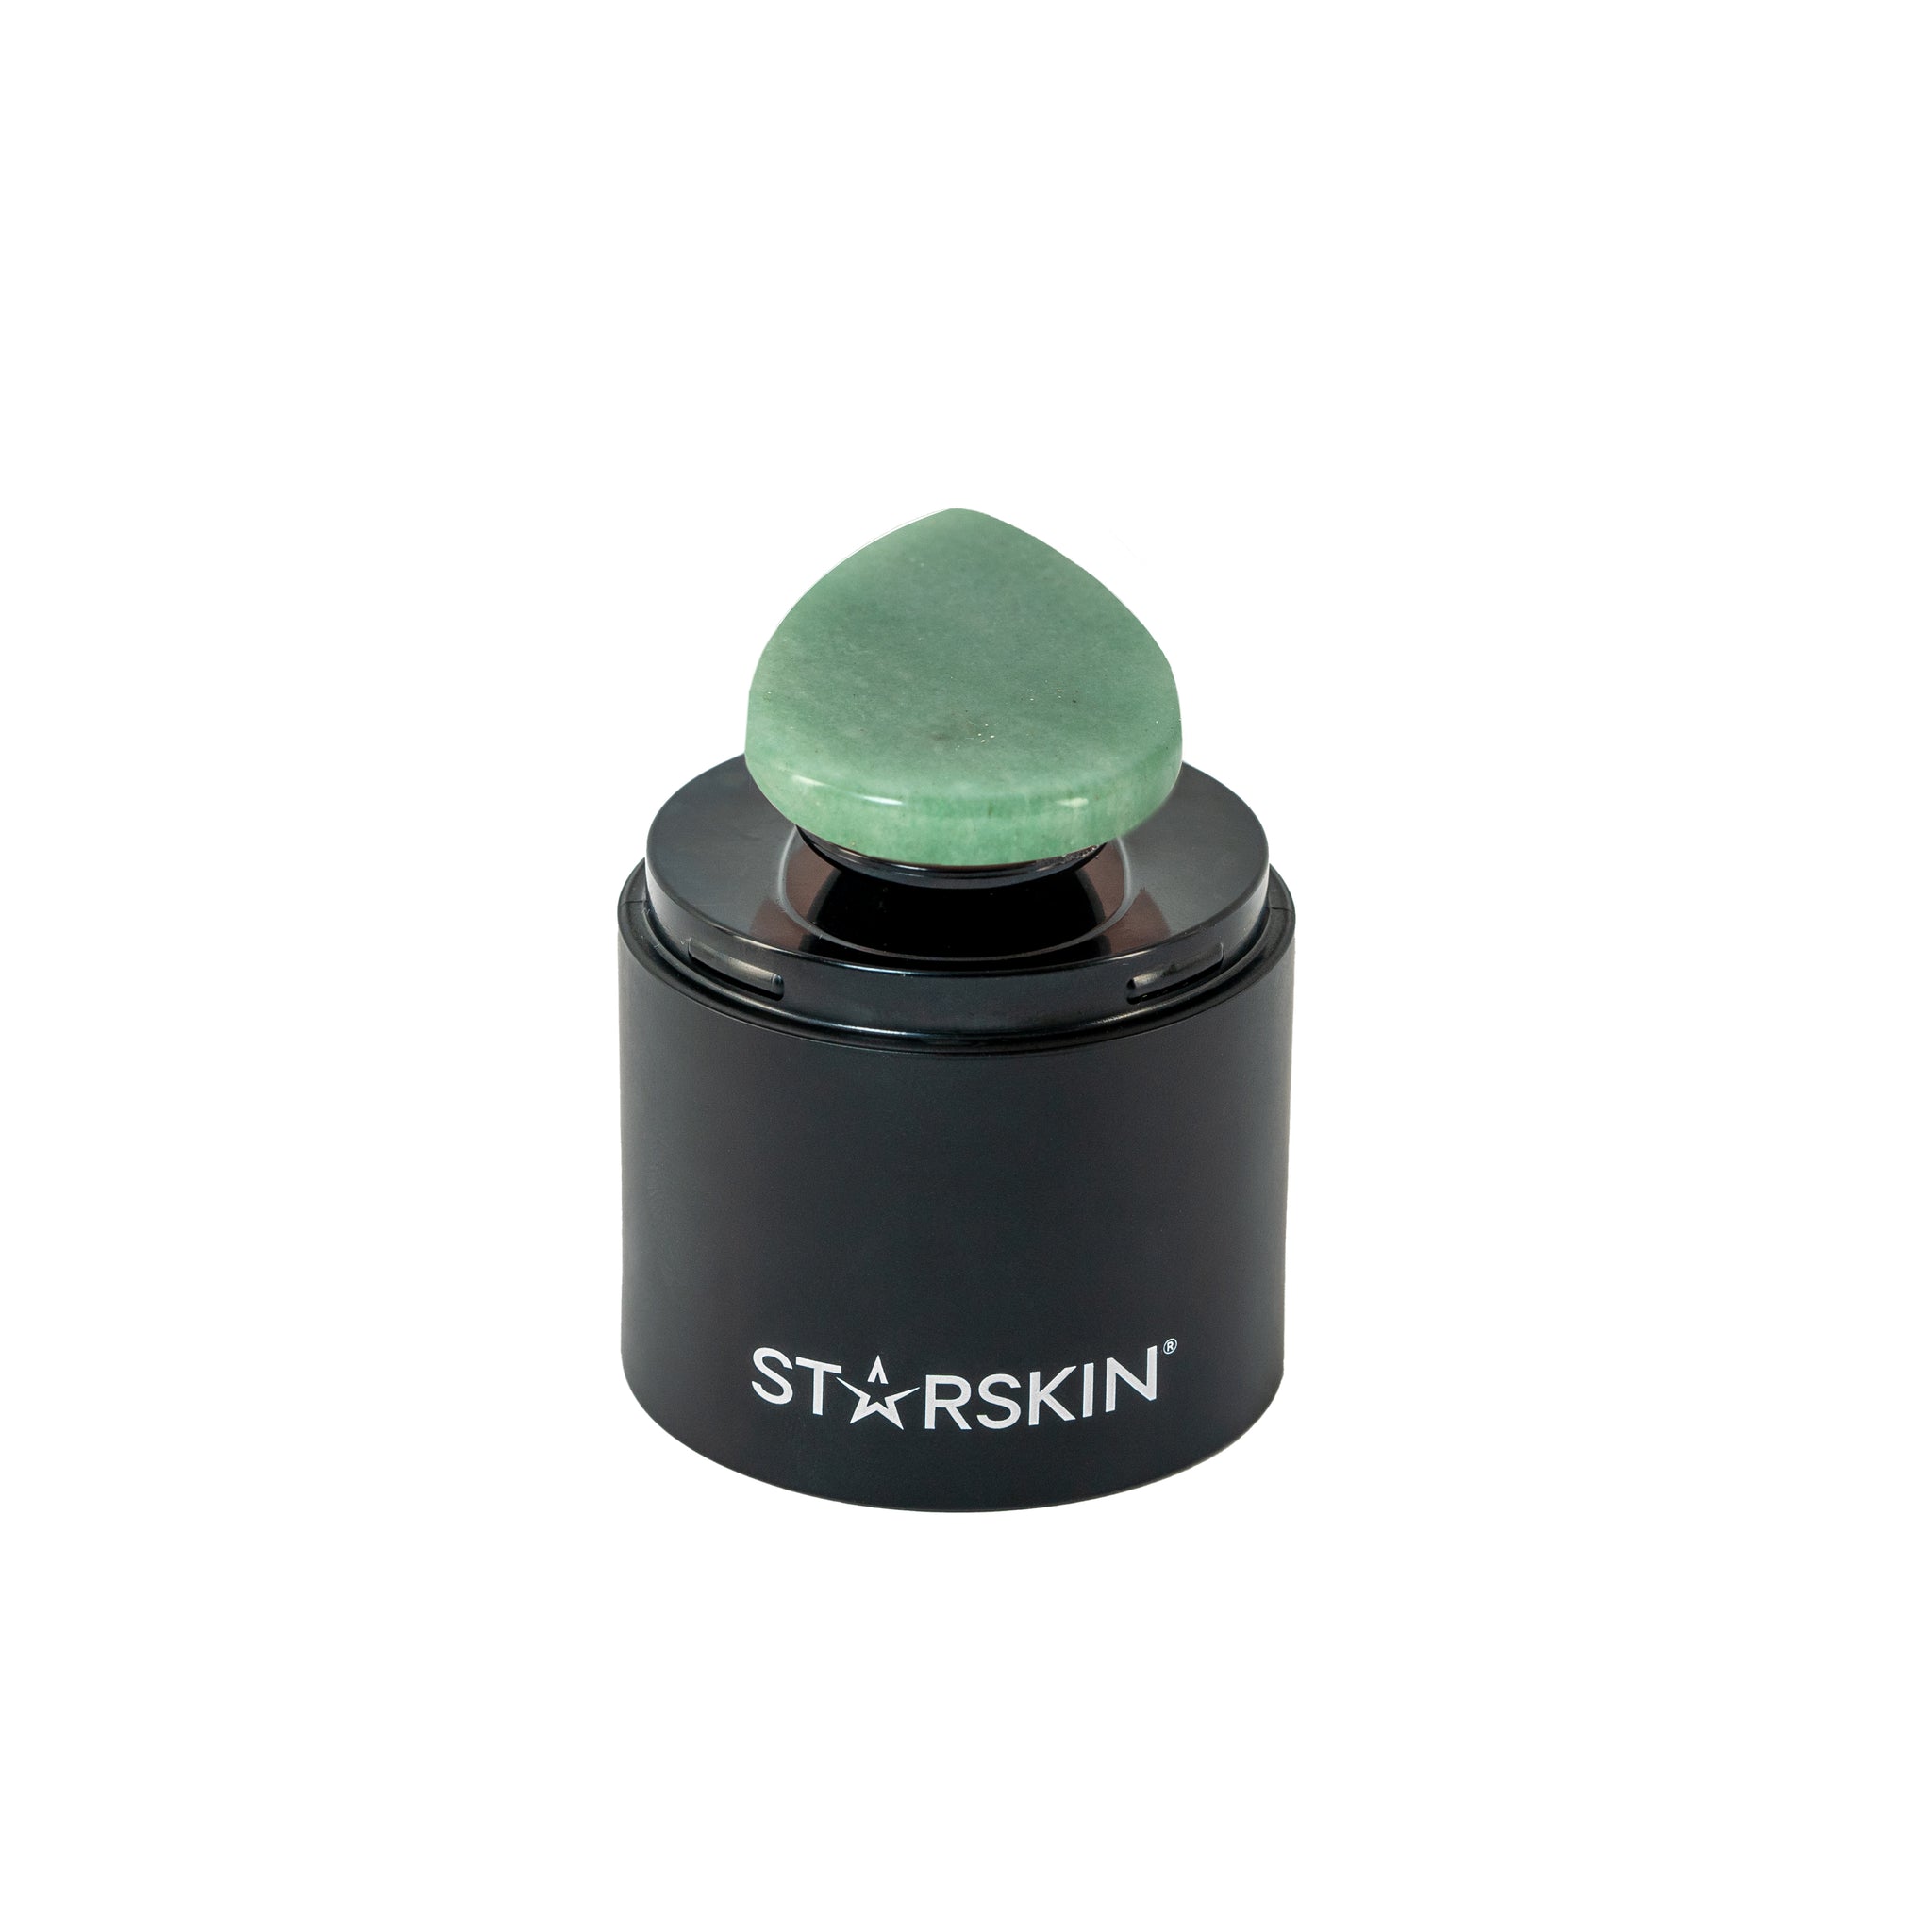 SkinIron Artist FX Jade stone From Starskin product picture front